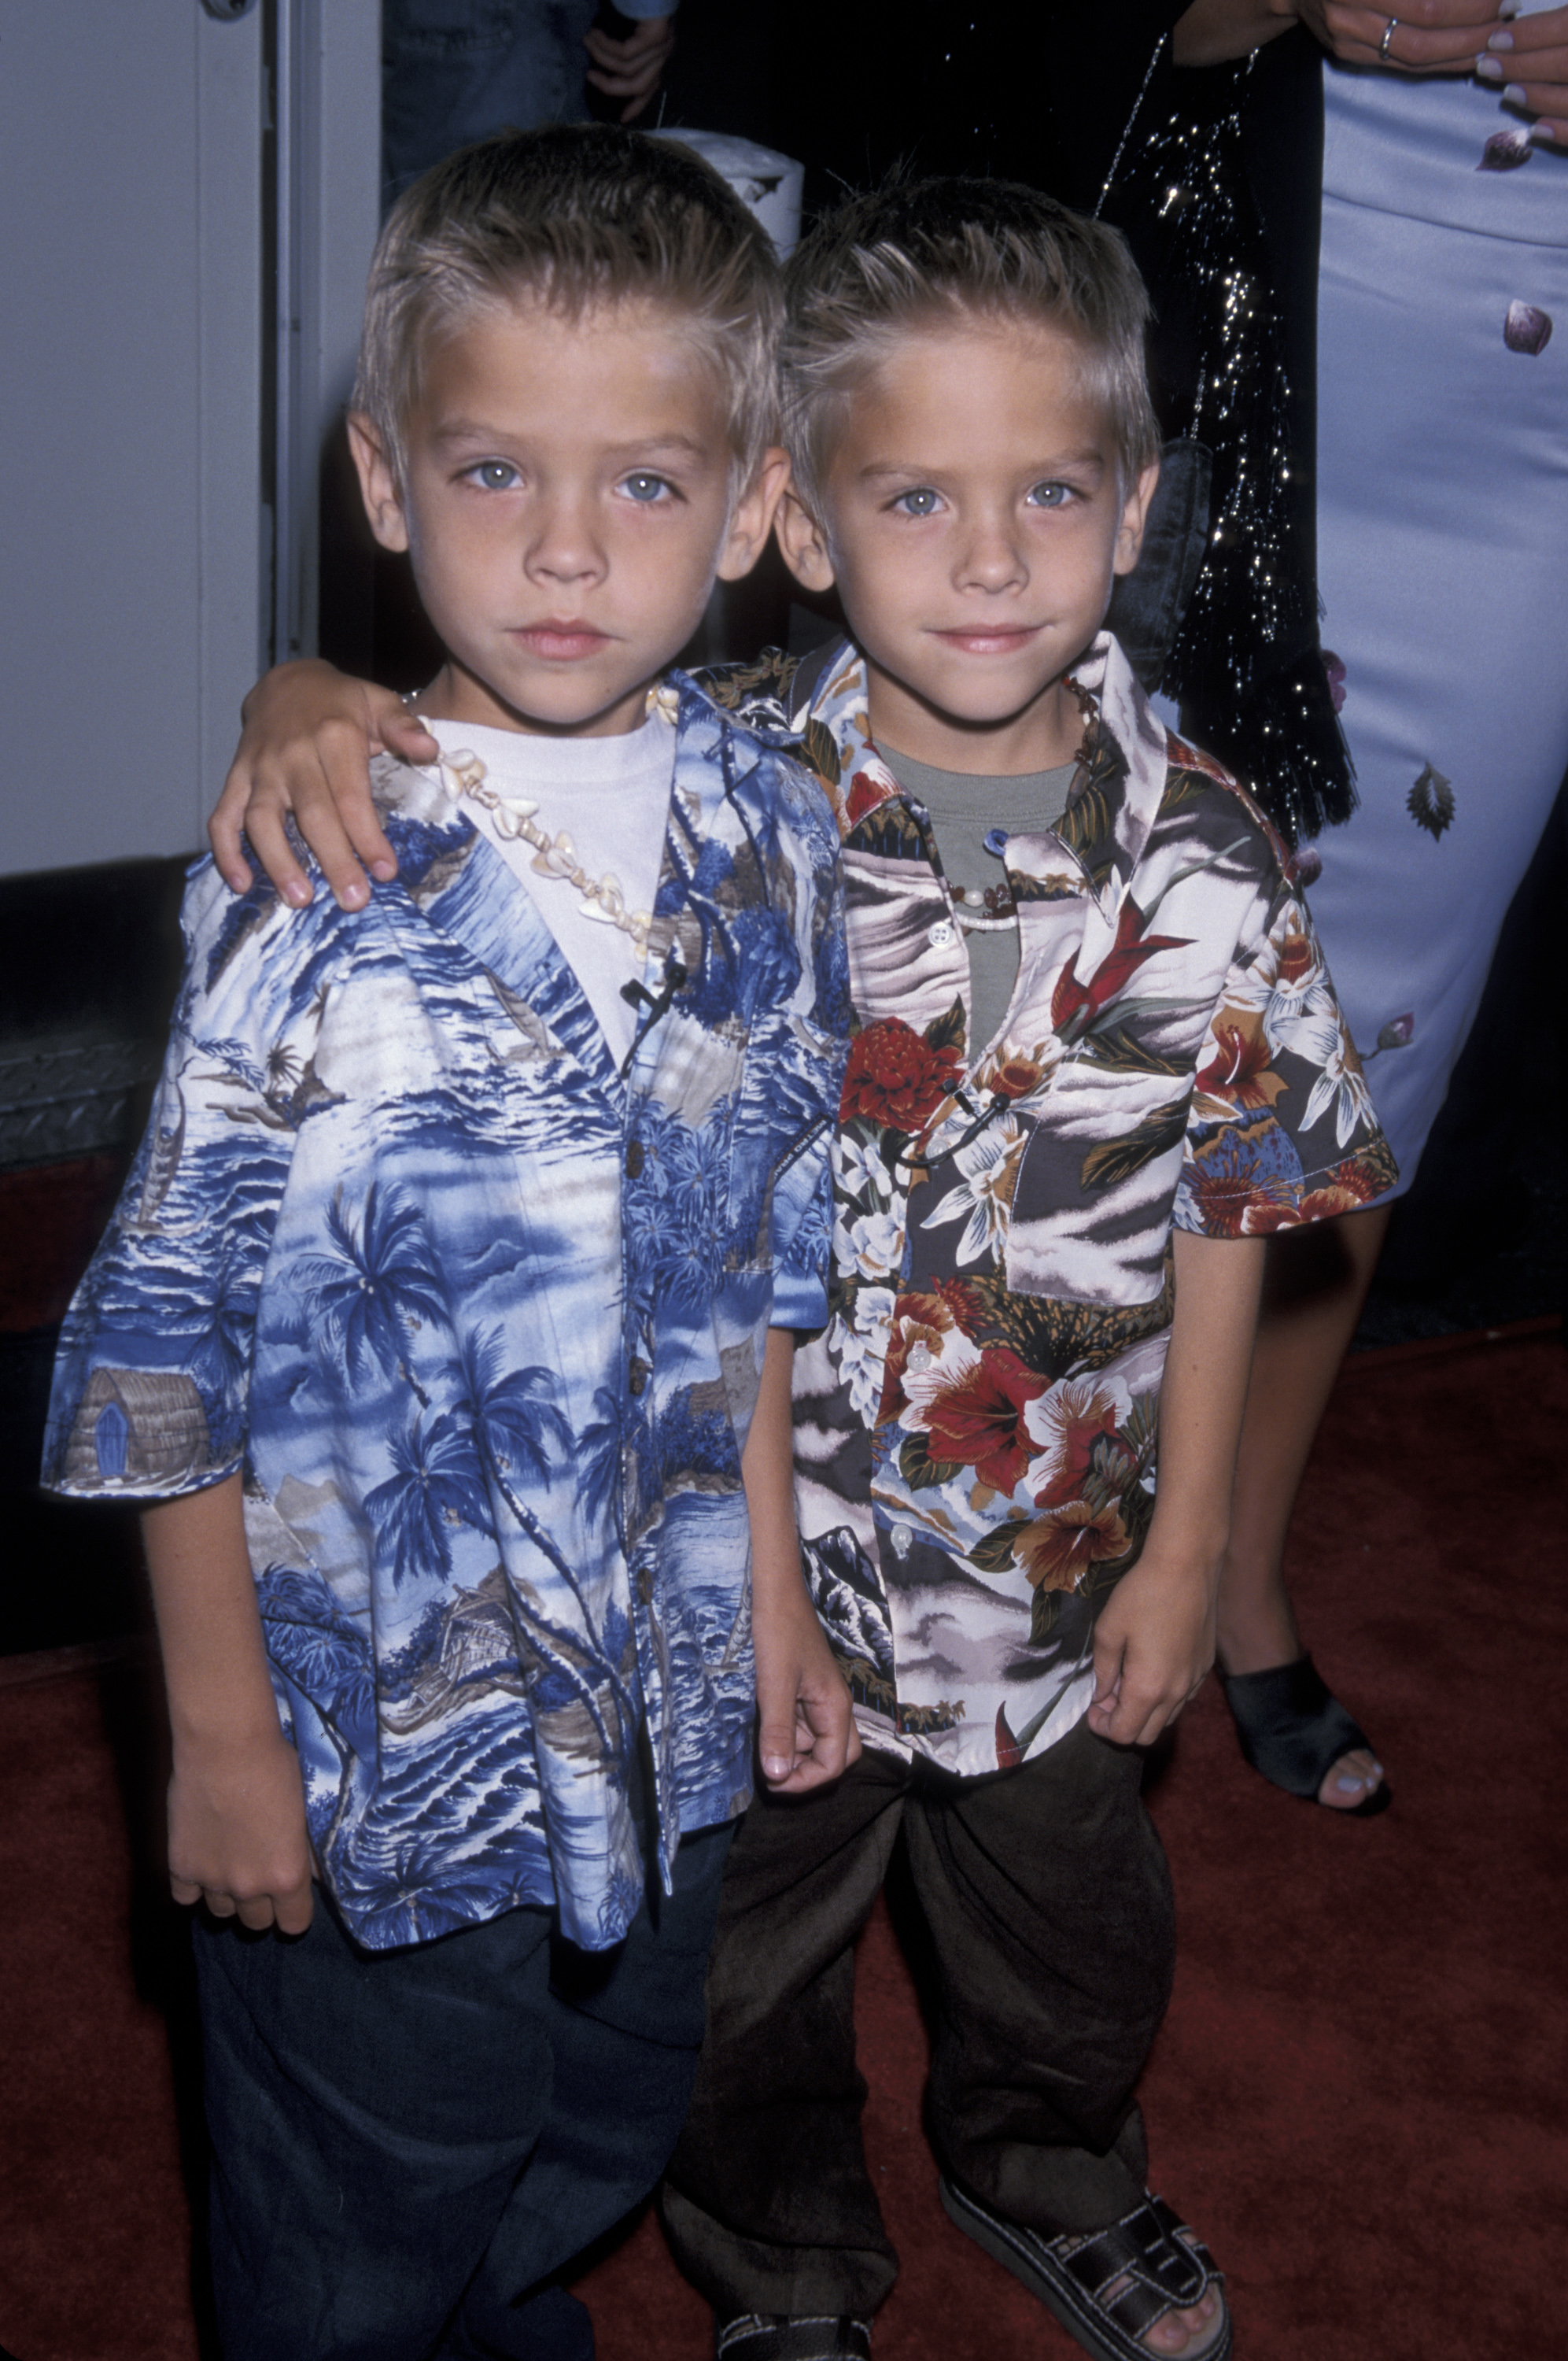 The Sprouse twins